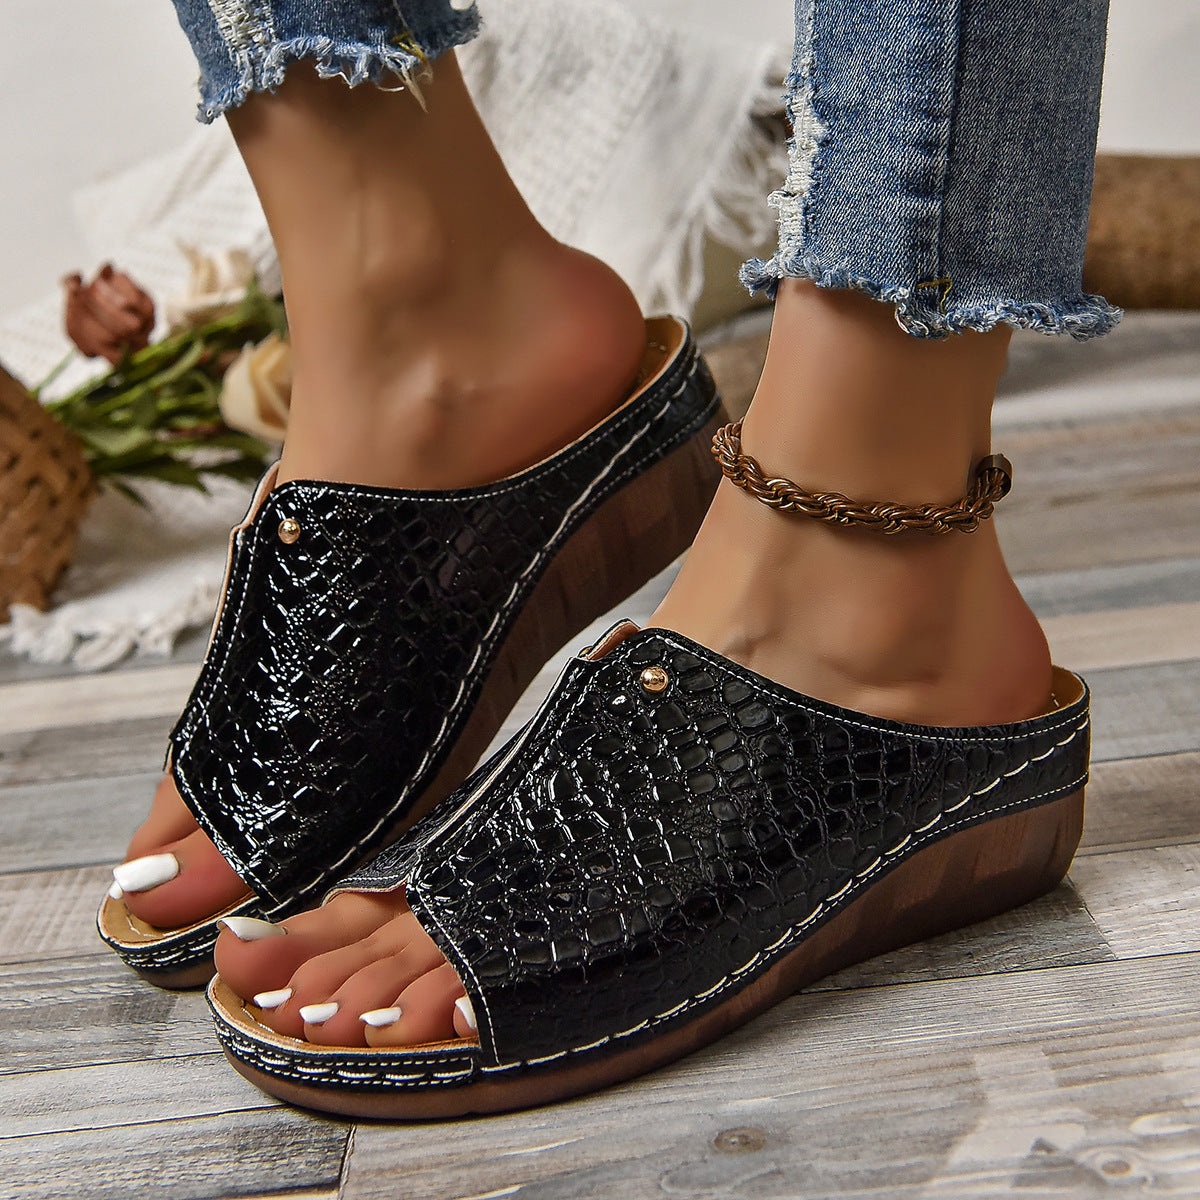 Fashion Crocodile-pattern Wedges Sandals Summer Outdoor Thick-soled Slippers Fish Mouth Shoes For Women